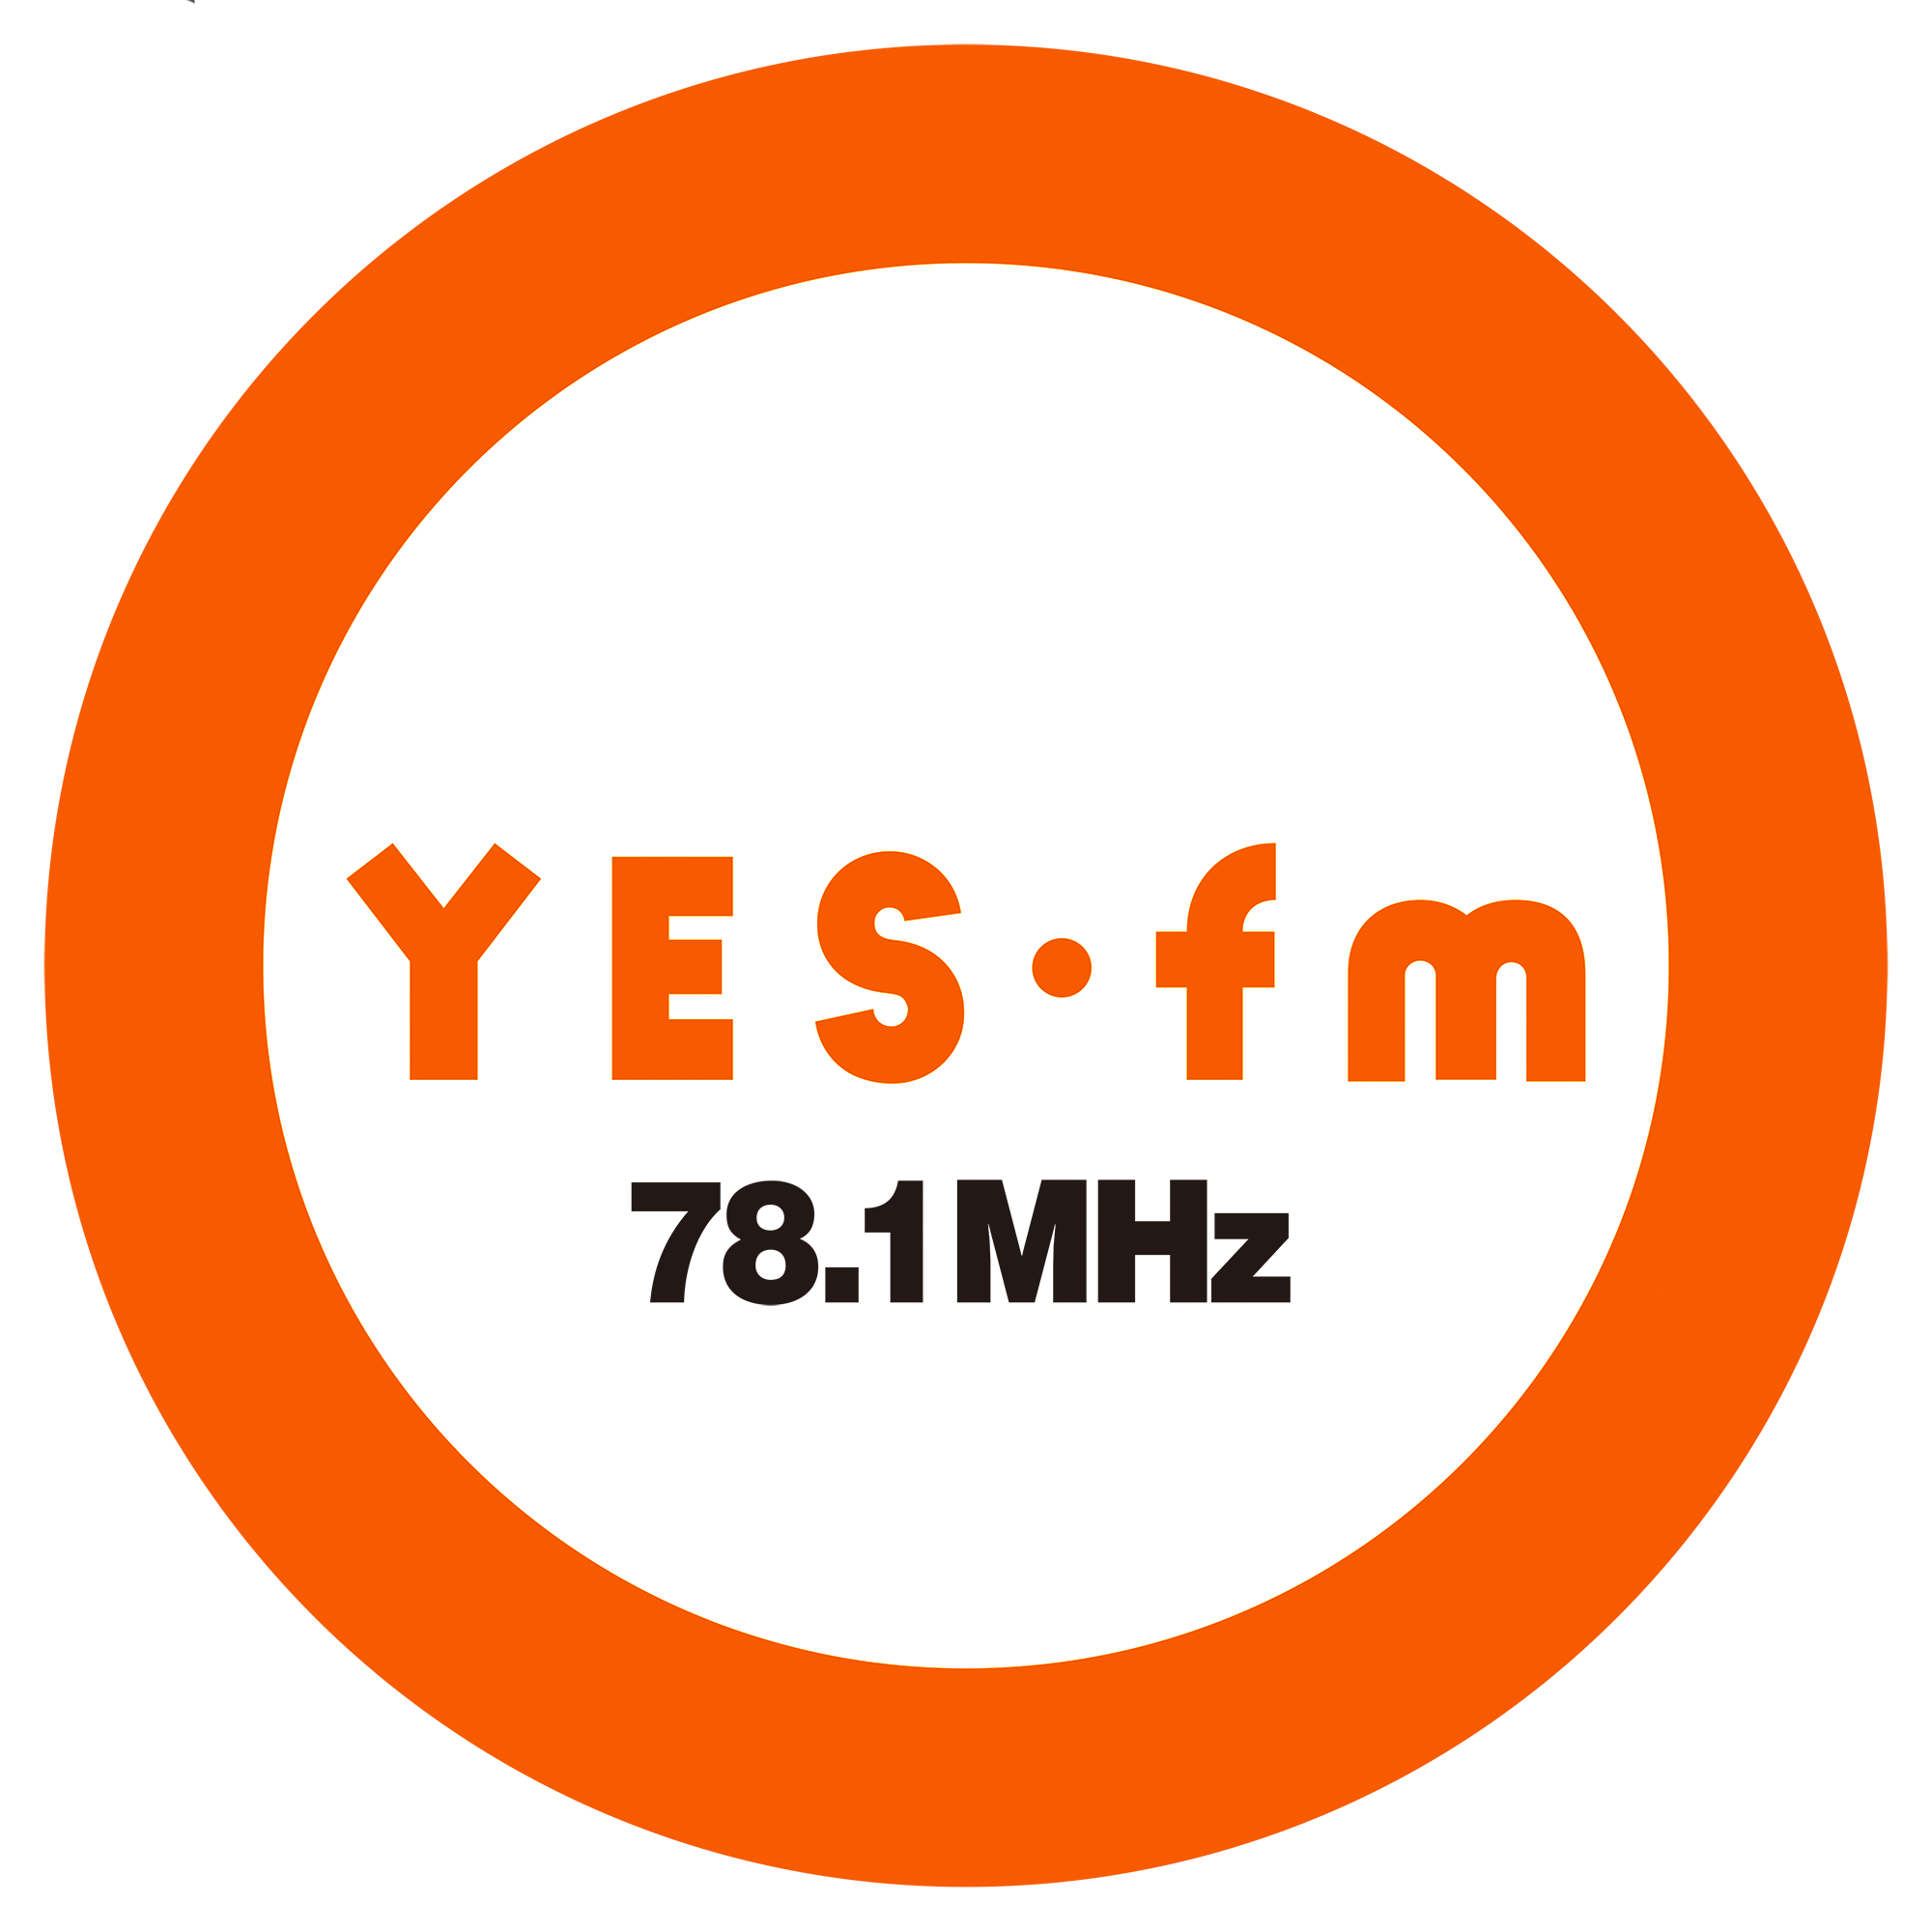 YES-fm 78.1MHz